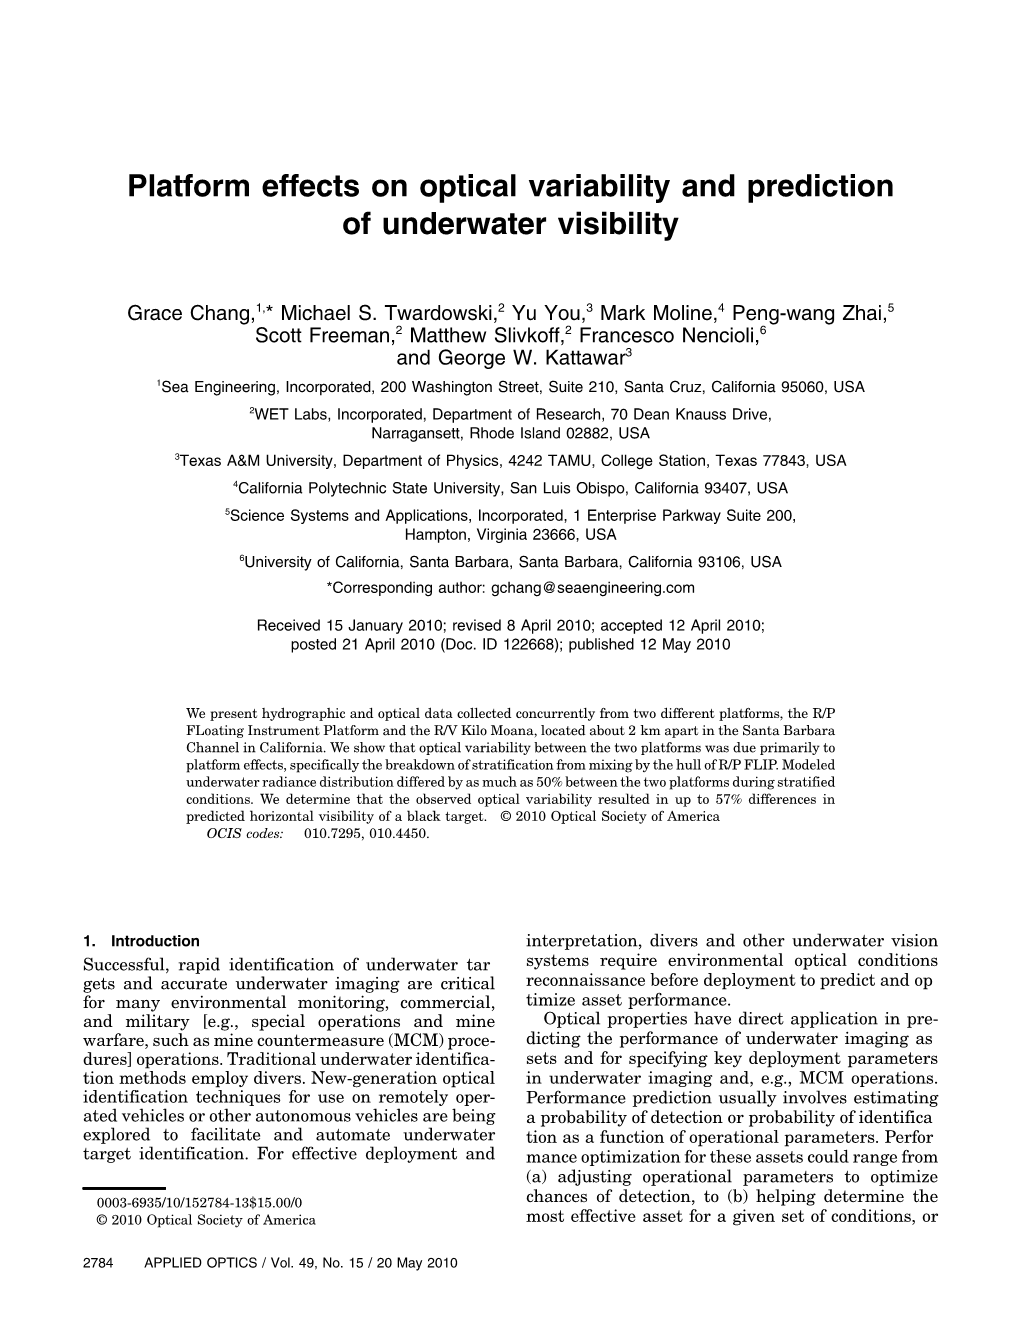 Platform Effects on Optical Variability and Prediction of Underwater Visibility